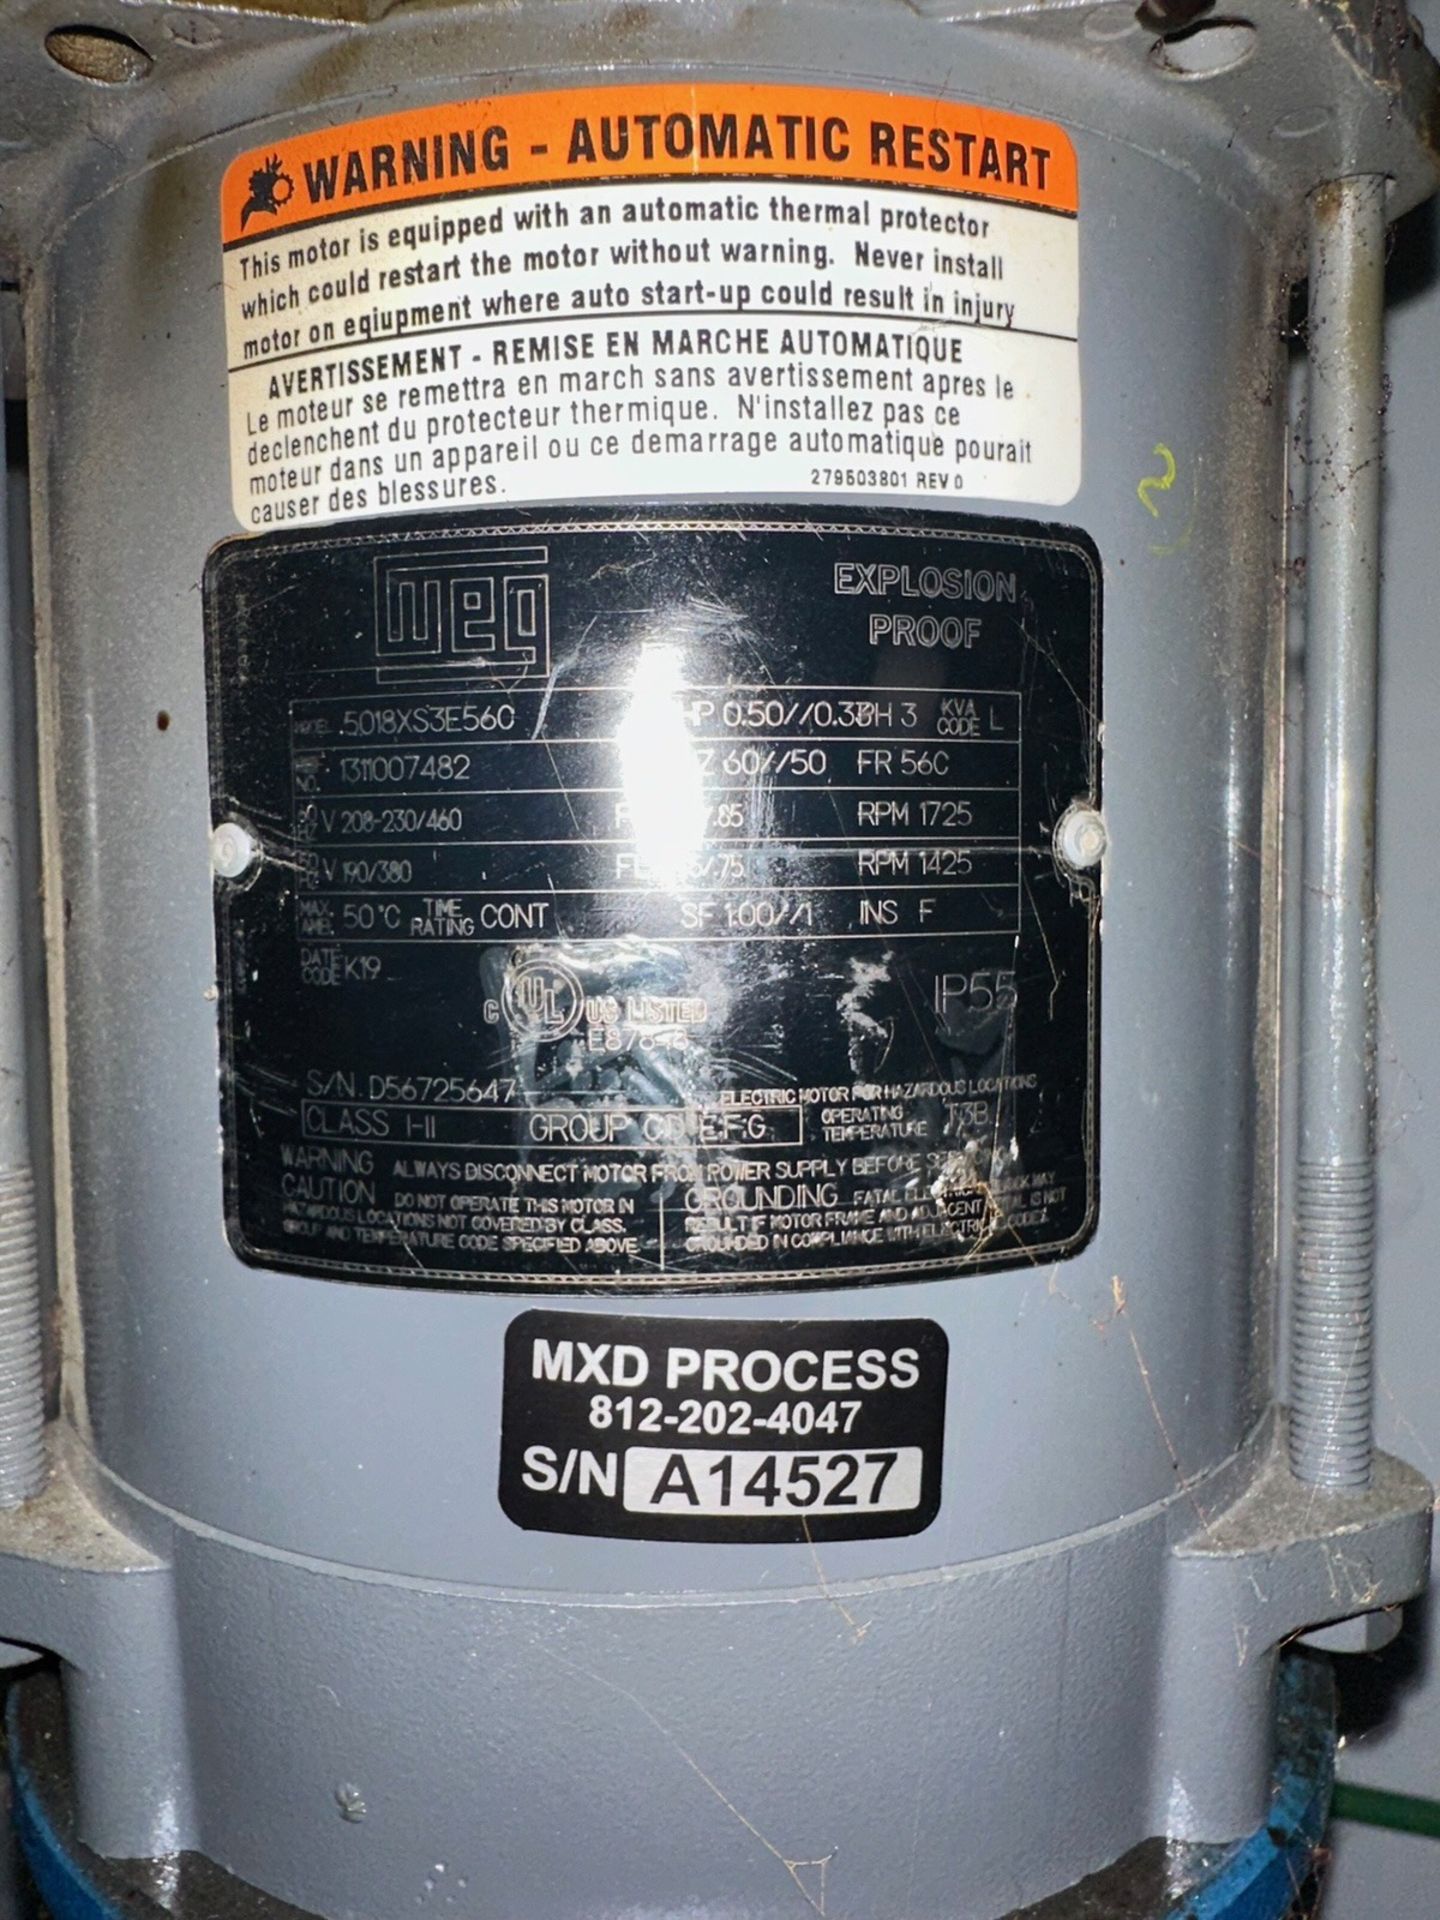 Stainless Steel Jacketed Tank 450L, With Agitation | Rig Fee $125 - Image 3 of 3